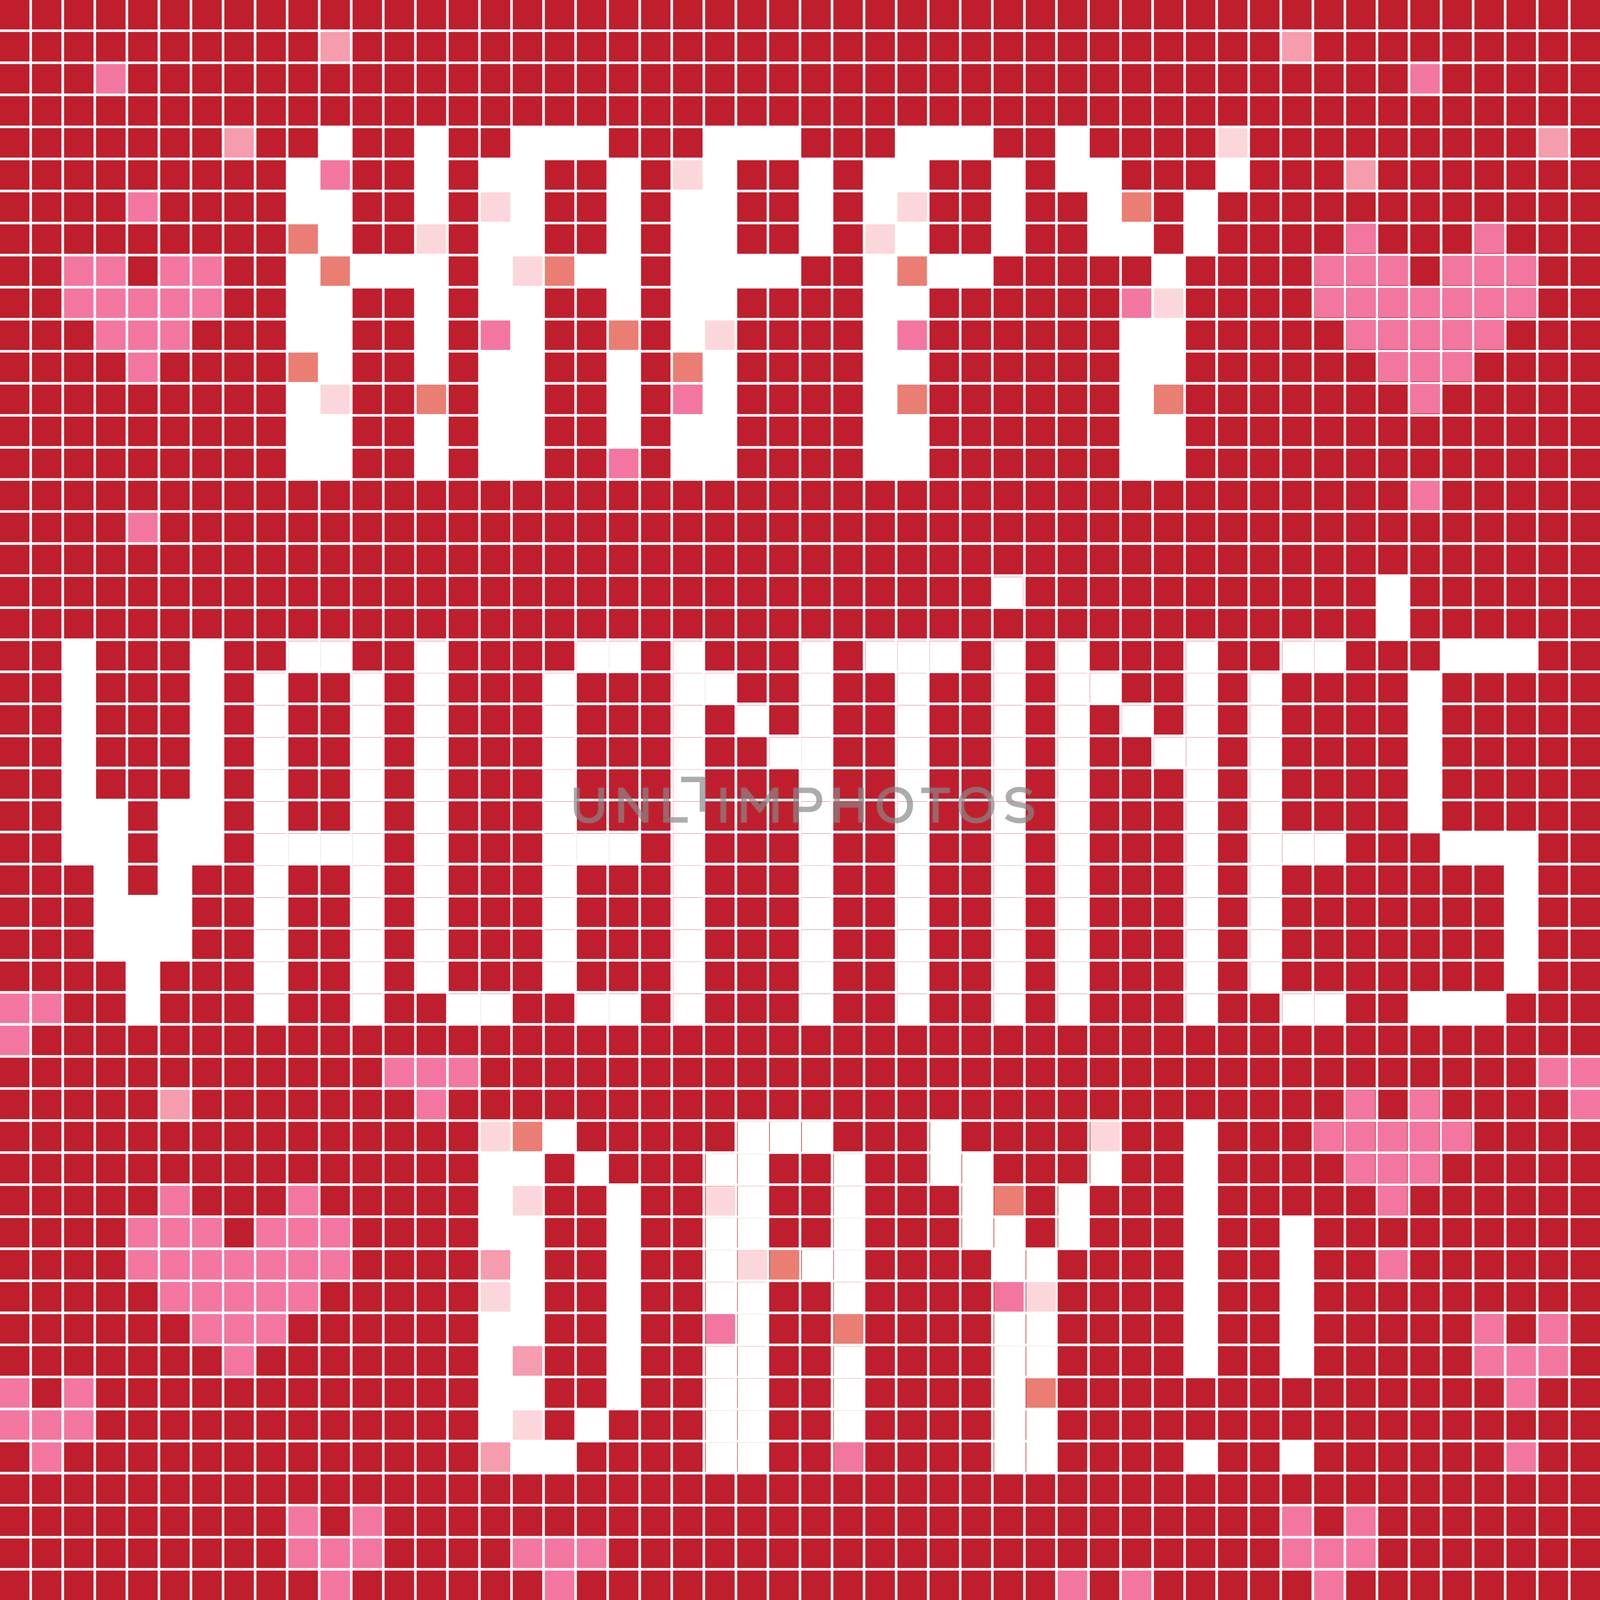 Valentine�s Day greetings card, pixel illustration of a scoreboard composition with digital text